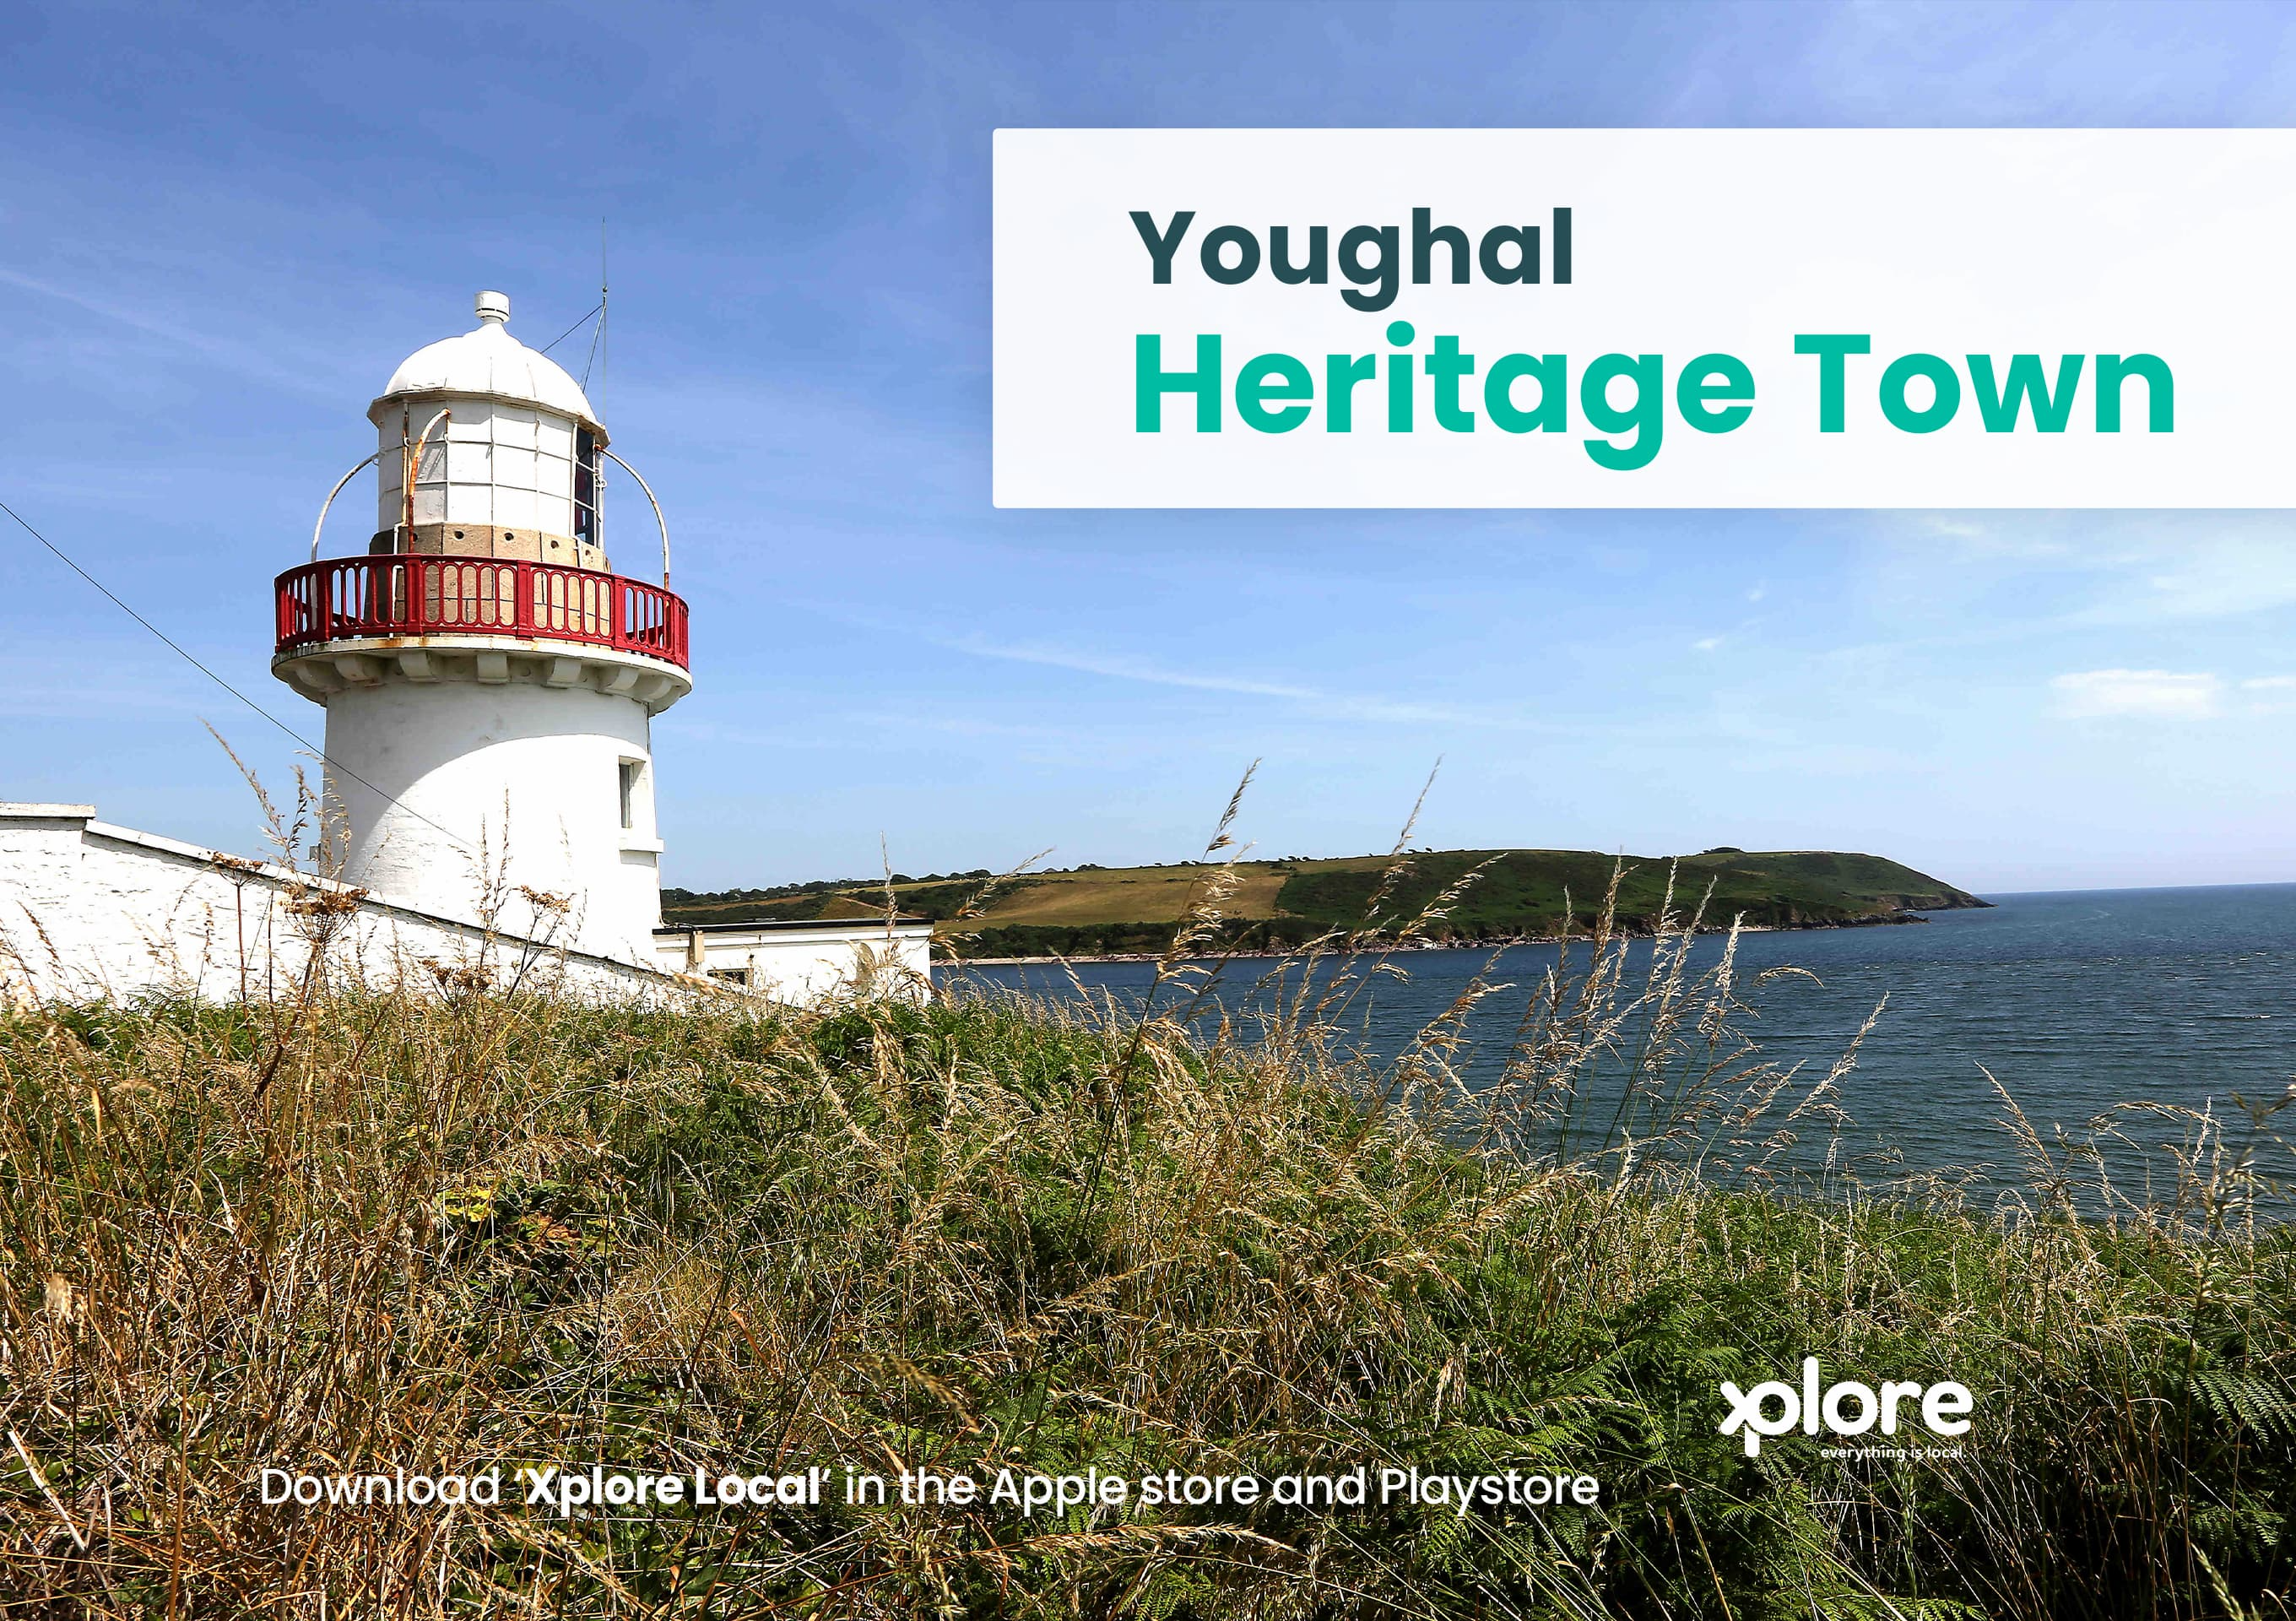 Discover Youghal with Xplore Local